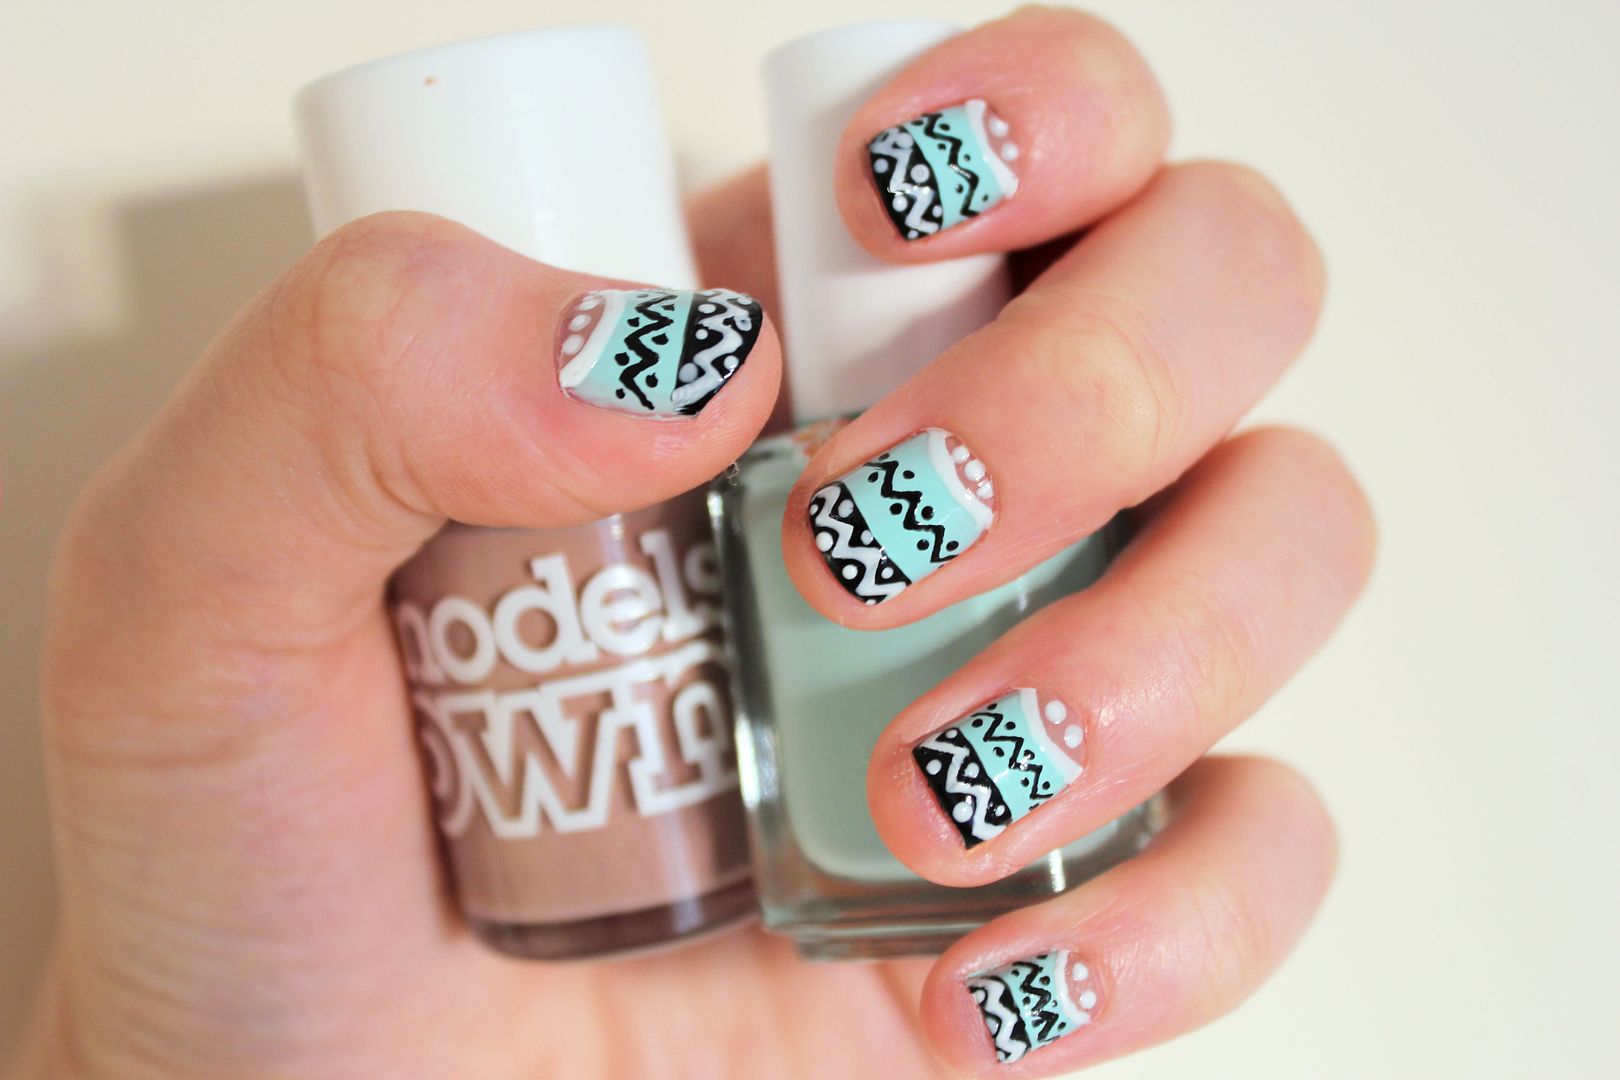 1. Aztec Nail Art Tutorial: 5 Easy Steps to Get the Look - wide 11